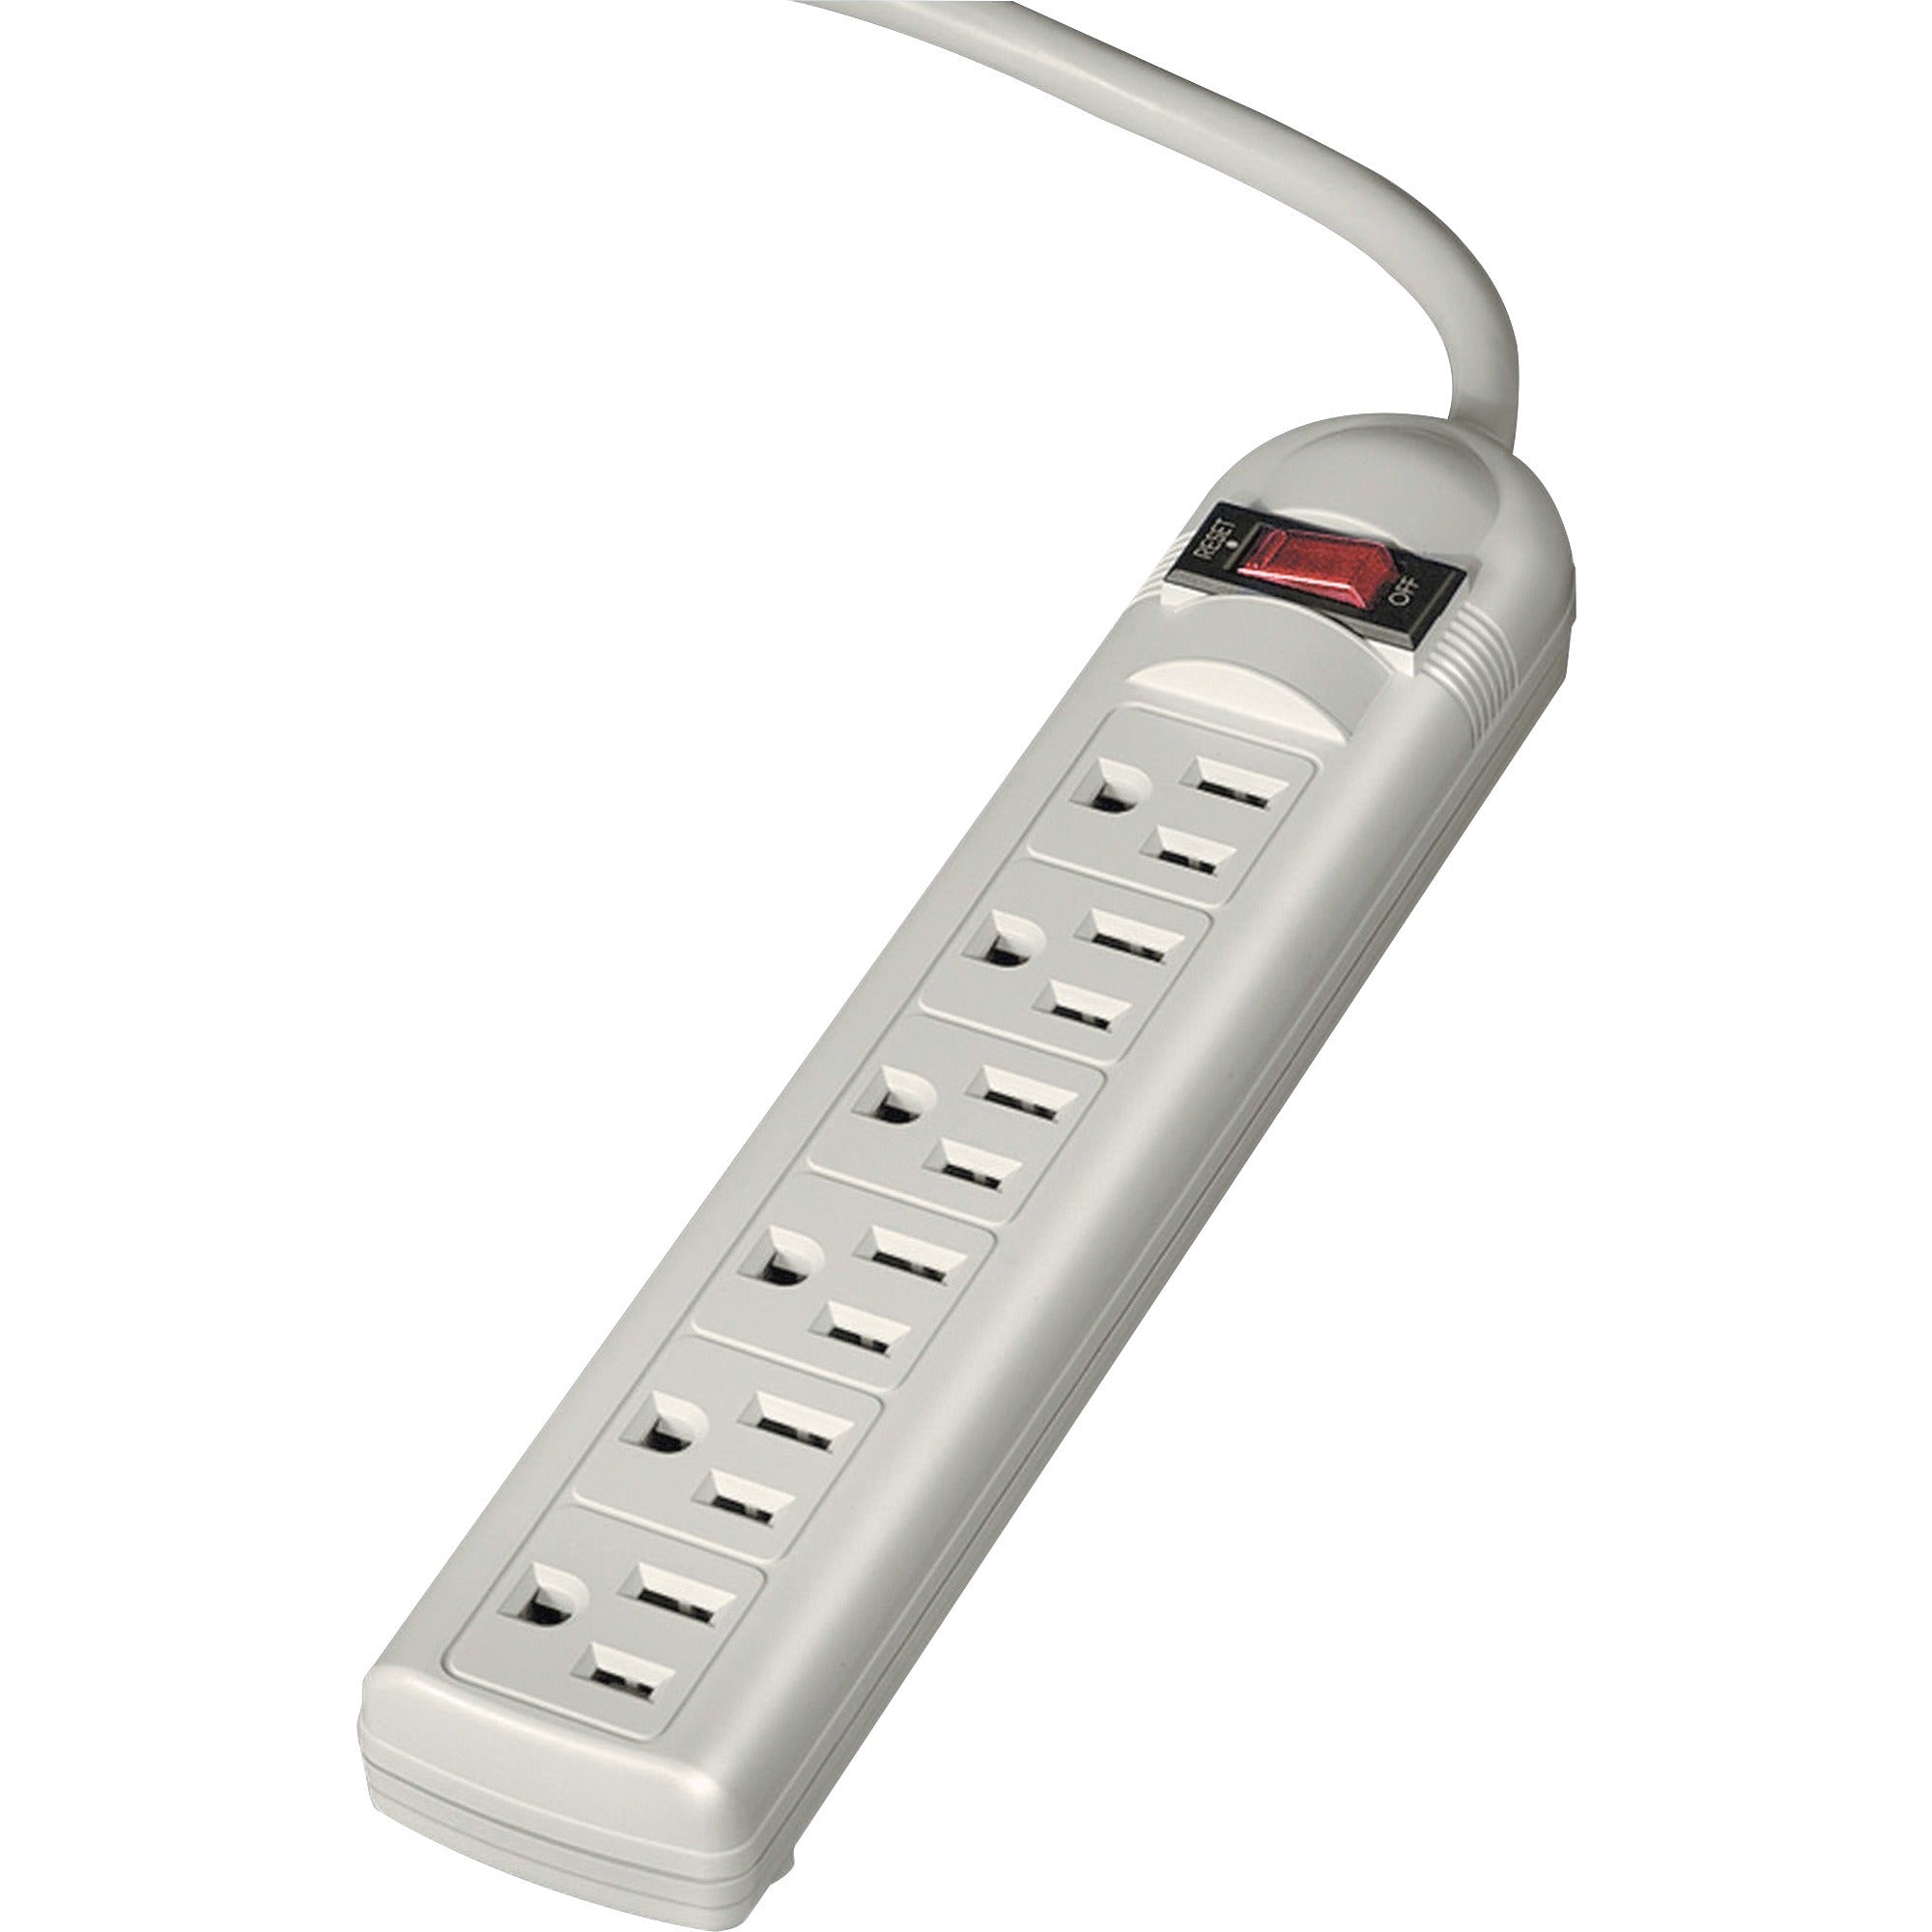 6 Outlet Power Strip with 90 Degree Outlets - 3-prong - 6 - 6 ft Cord - Platinum - 